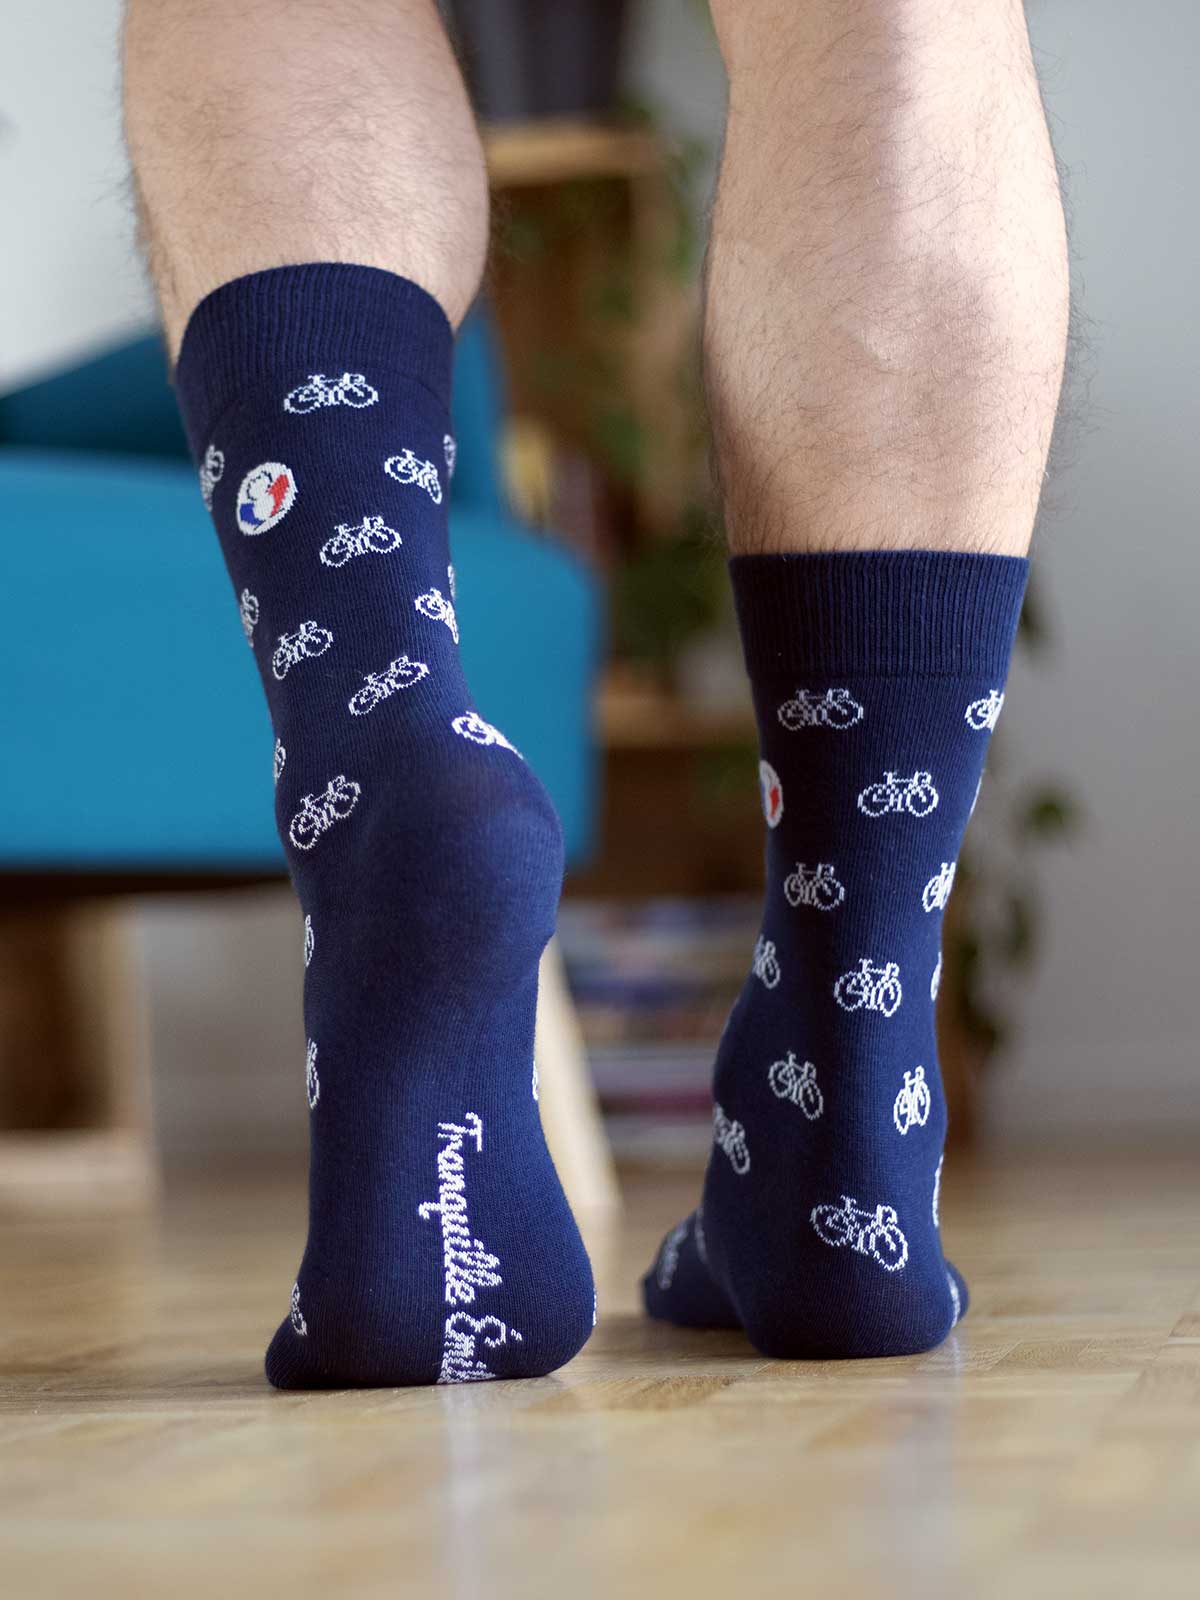 chaussettes-made-in-france-les-velos-bleu-marine-3